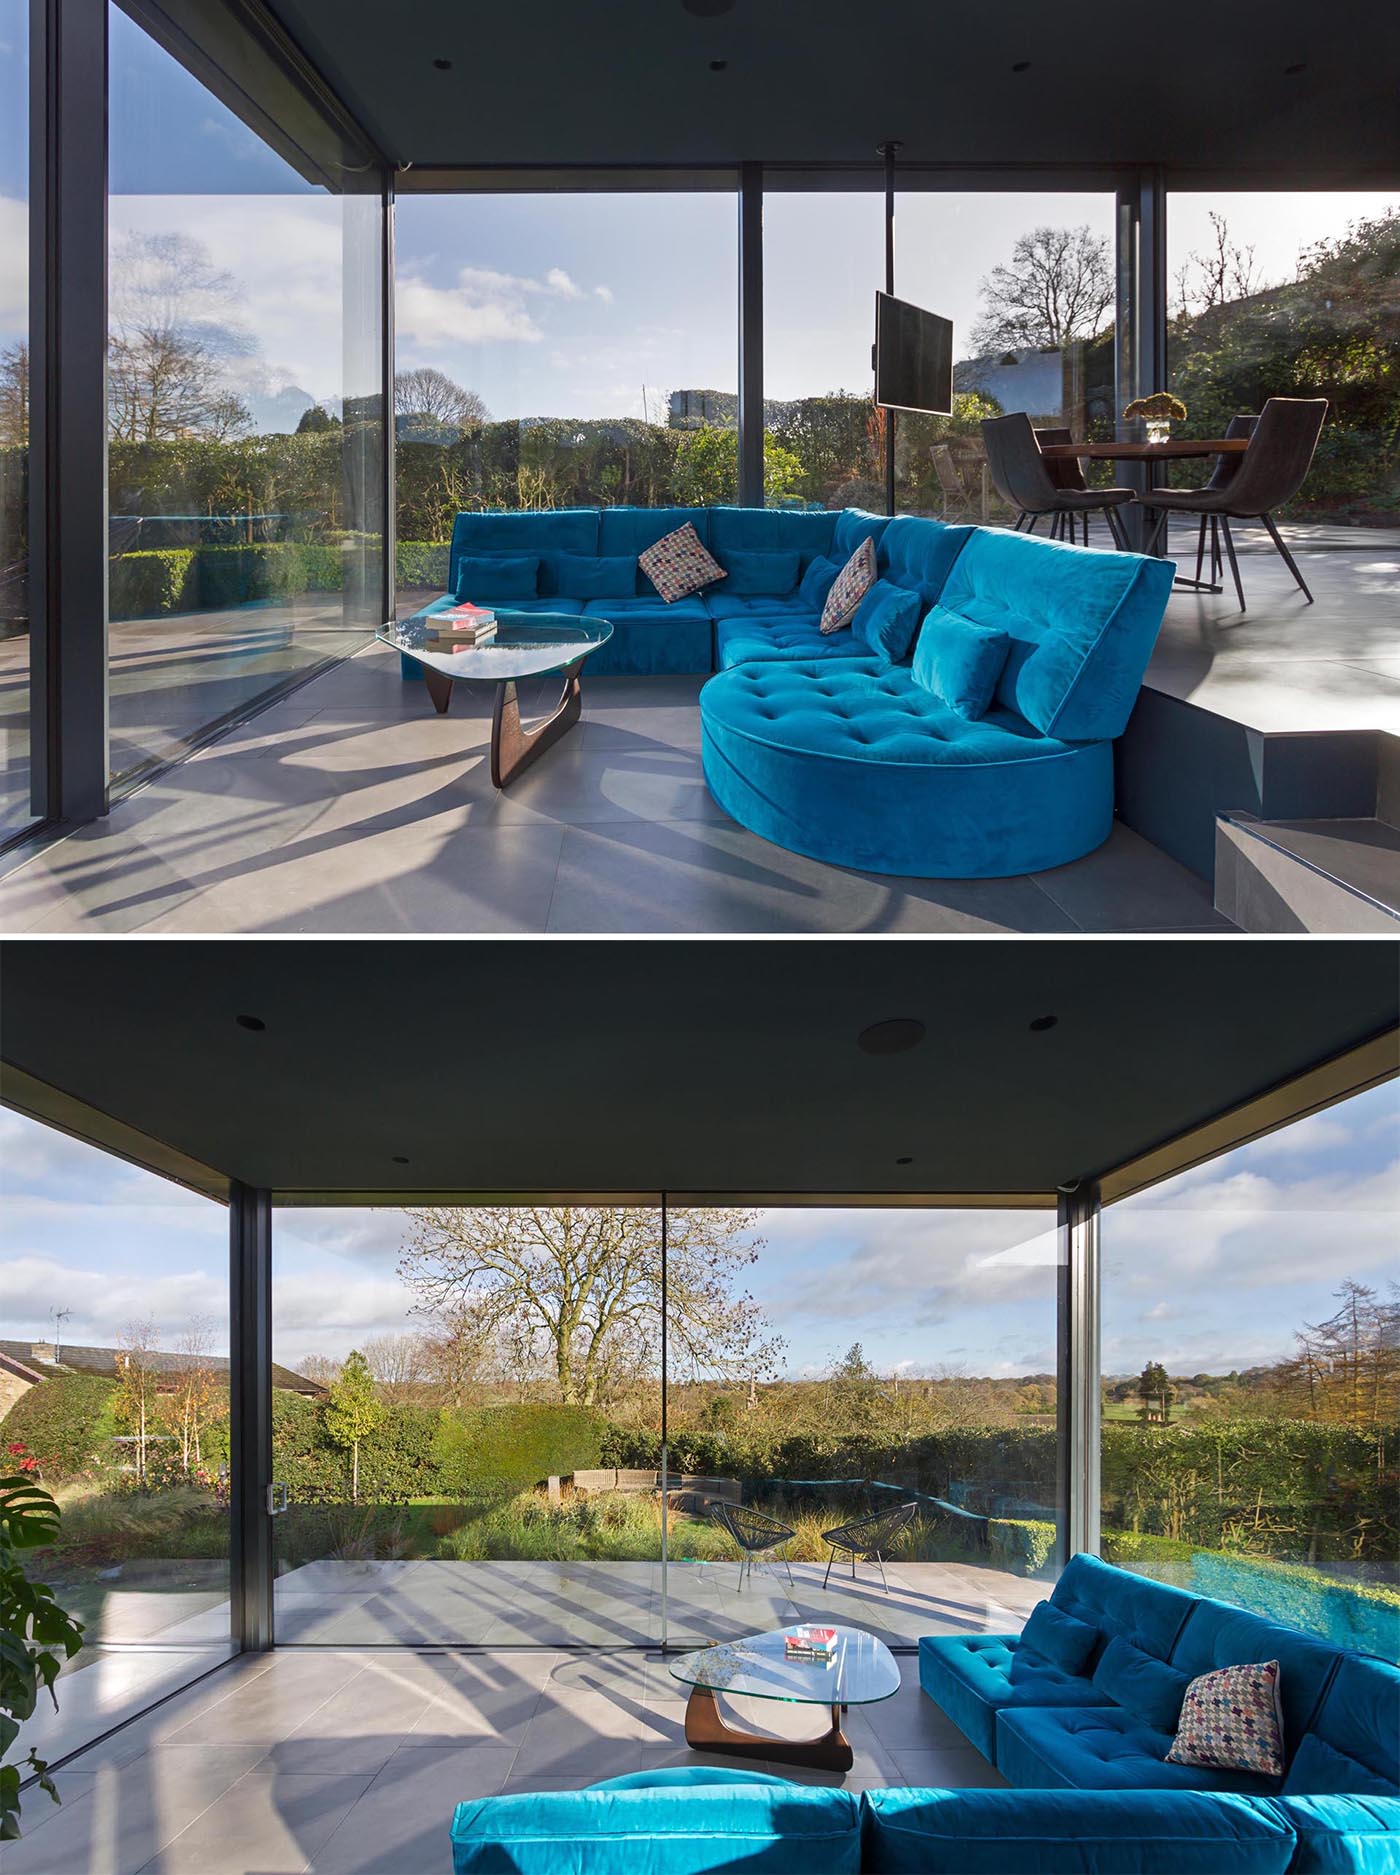 The modern interior of this addition includes a 1960’s style split level living area away from the kitchen and dining area, creating a space to comfortably relax and enjoy the views of the garden day and night.